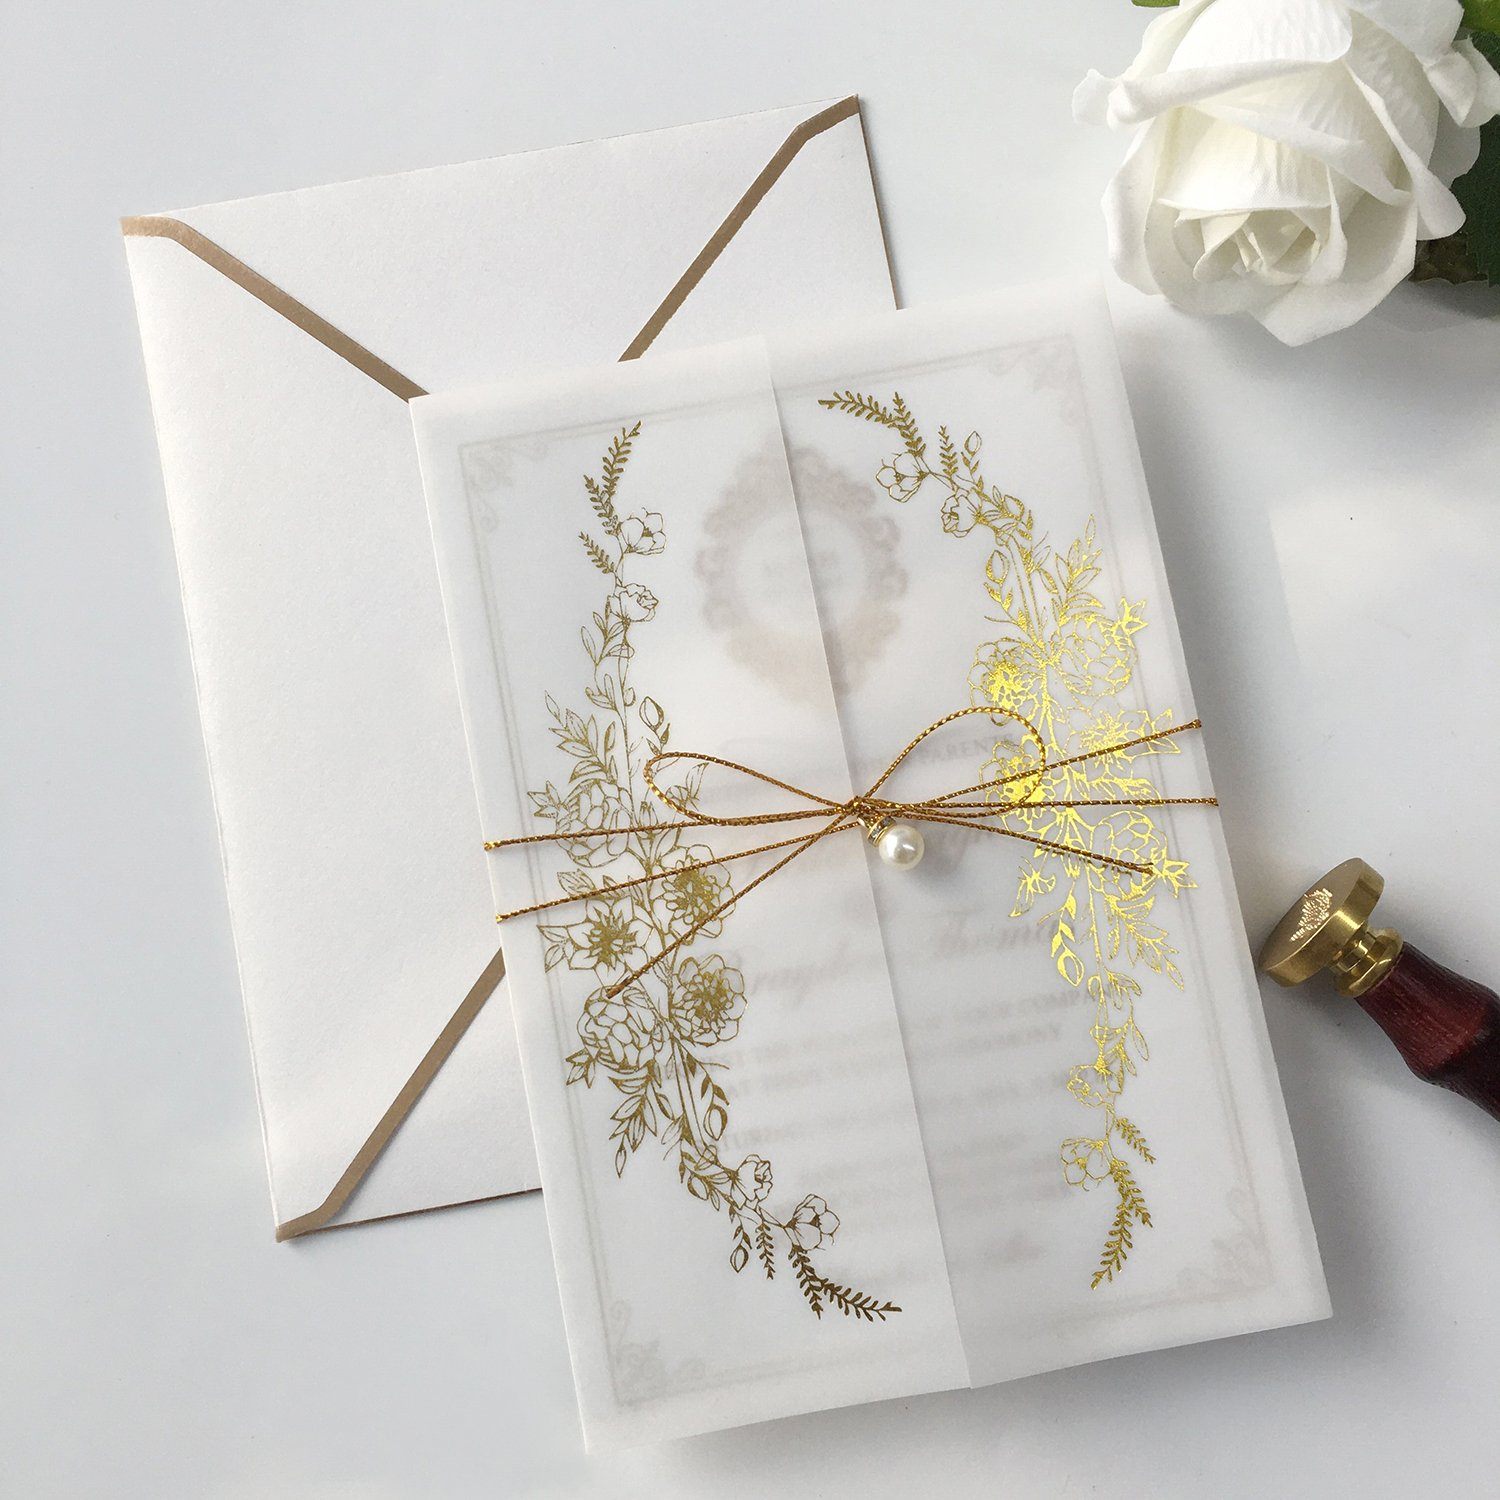 Calligraphy Invites Vellum Paper Wrap with Foil Printing and Gold Twin